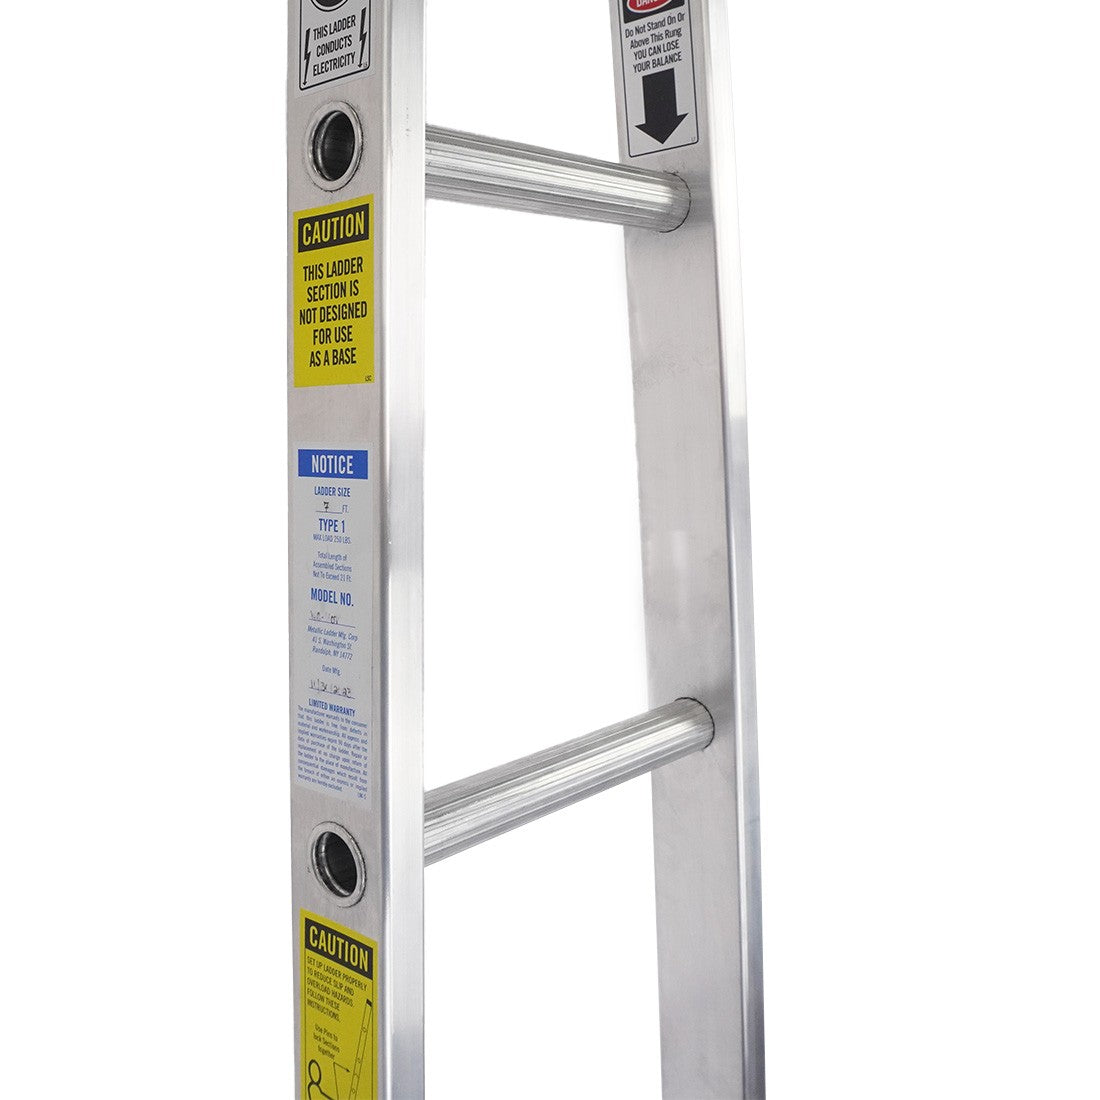 Metallic Ladder Aluminum Open Top Section - 7 Foot Left Angle View